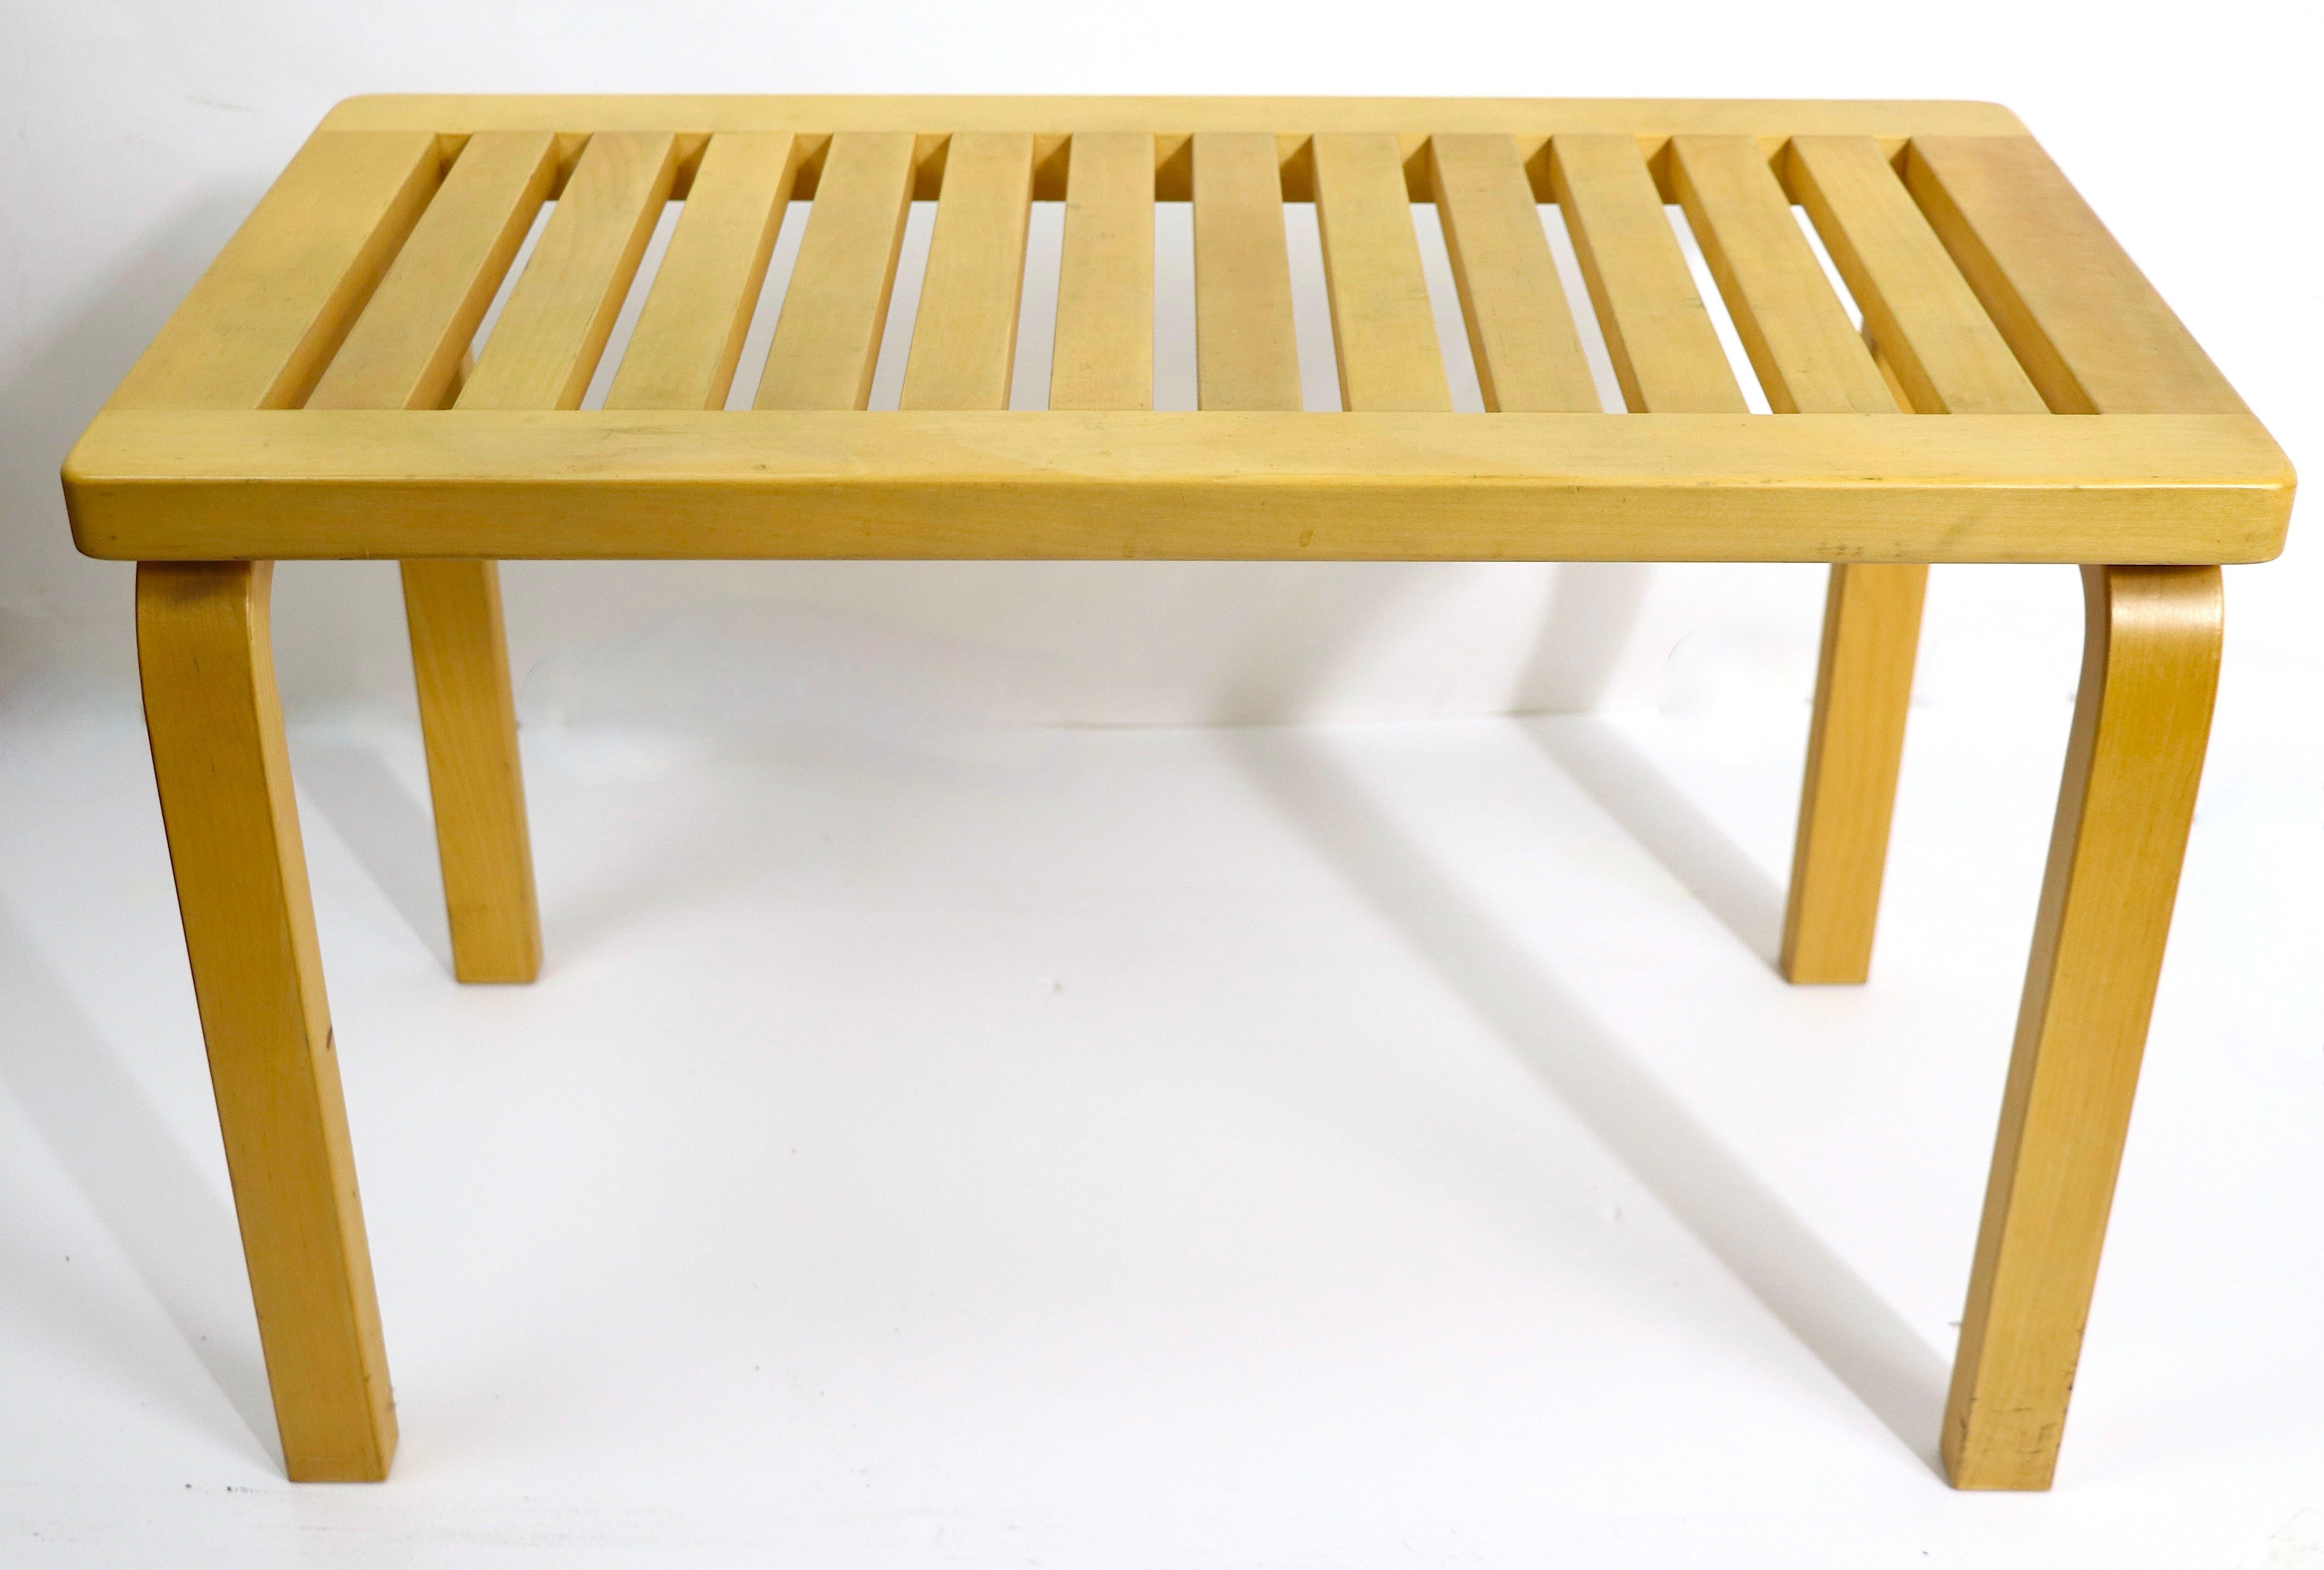 Iconic Aalto design end, side table, bench in solid wood, with slatted top. This example is vintage 1970/1980's. It is in very good, original, clean and ready use use condition showing only light cosmetic wear, normal and consistent with age.